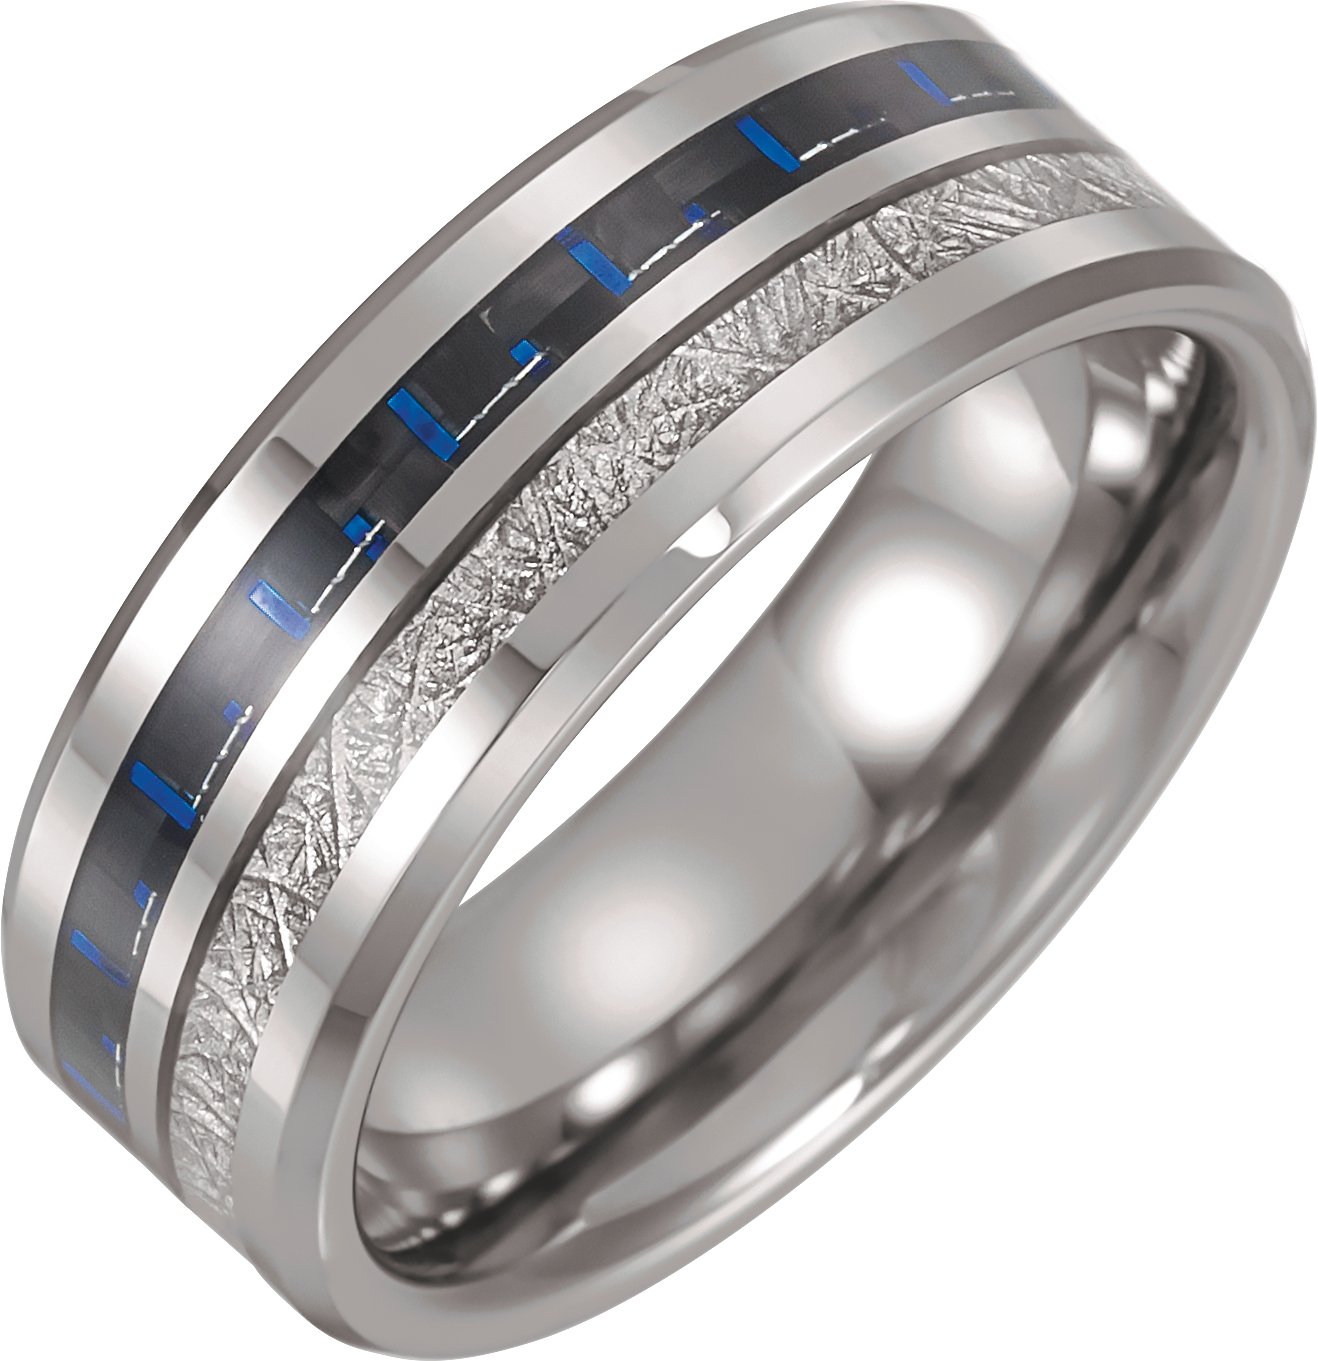 Tungsten 8 mm Band with Imitation Meteorite and Carbon Fiber Inlay Size 10 